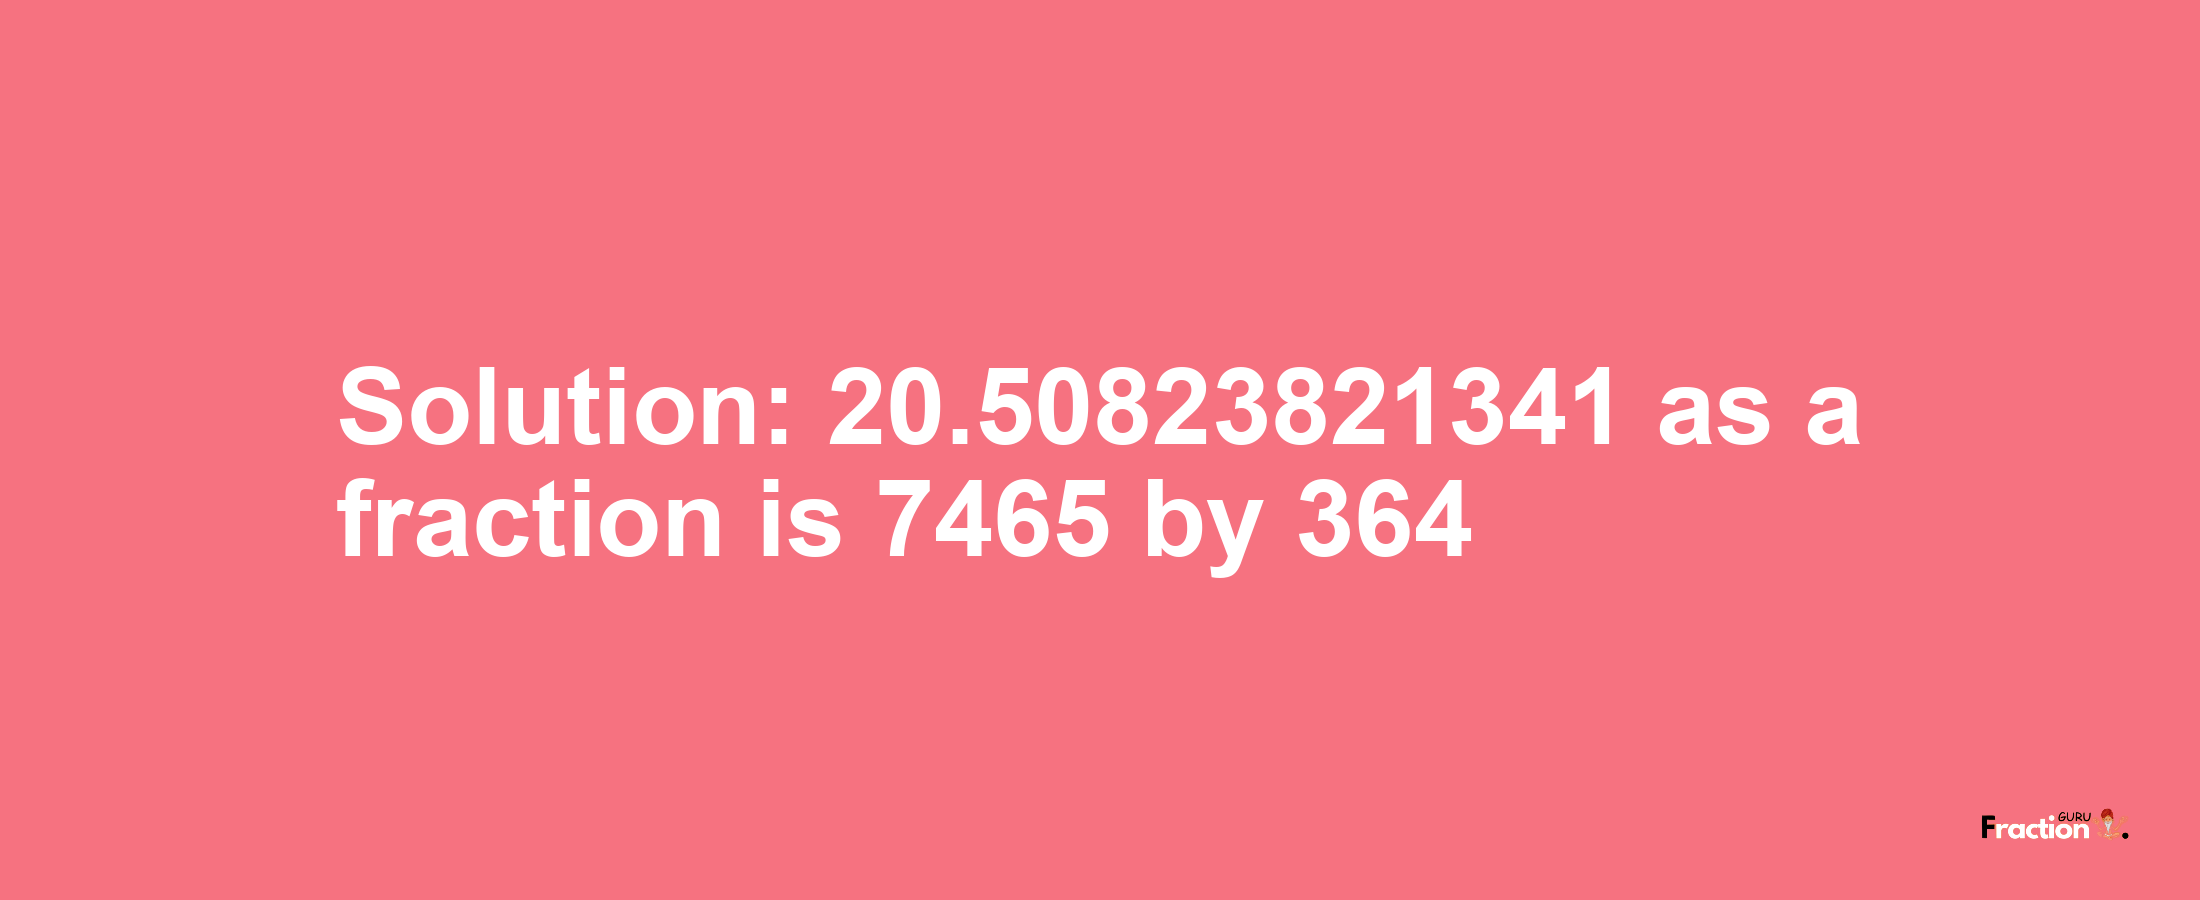 Solution:20.50823821341 as a fraction is 7465/364